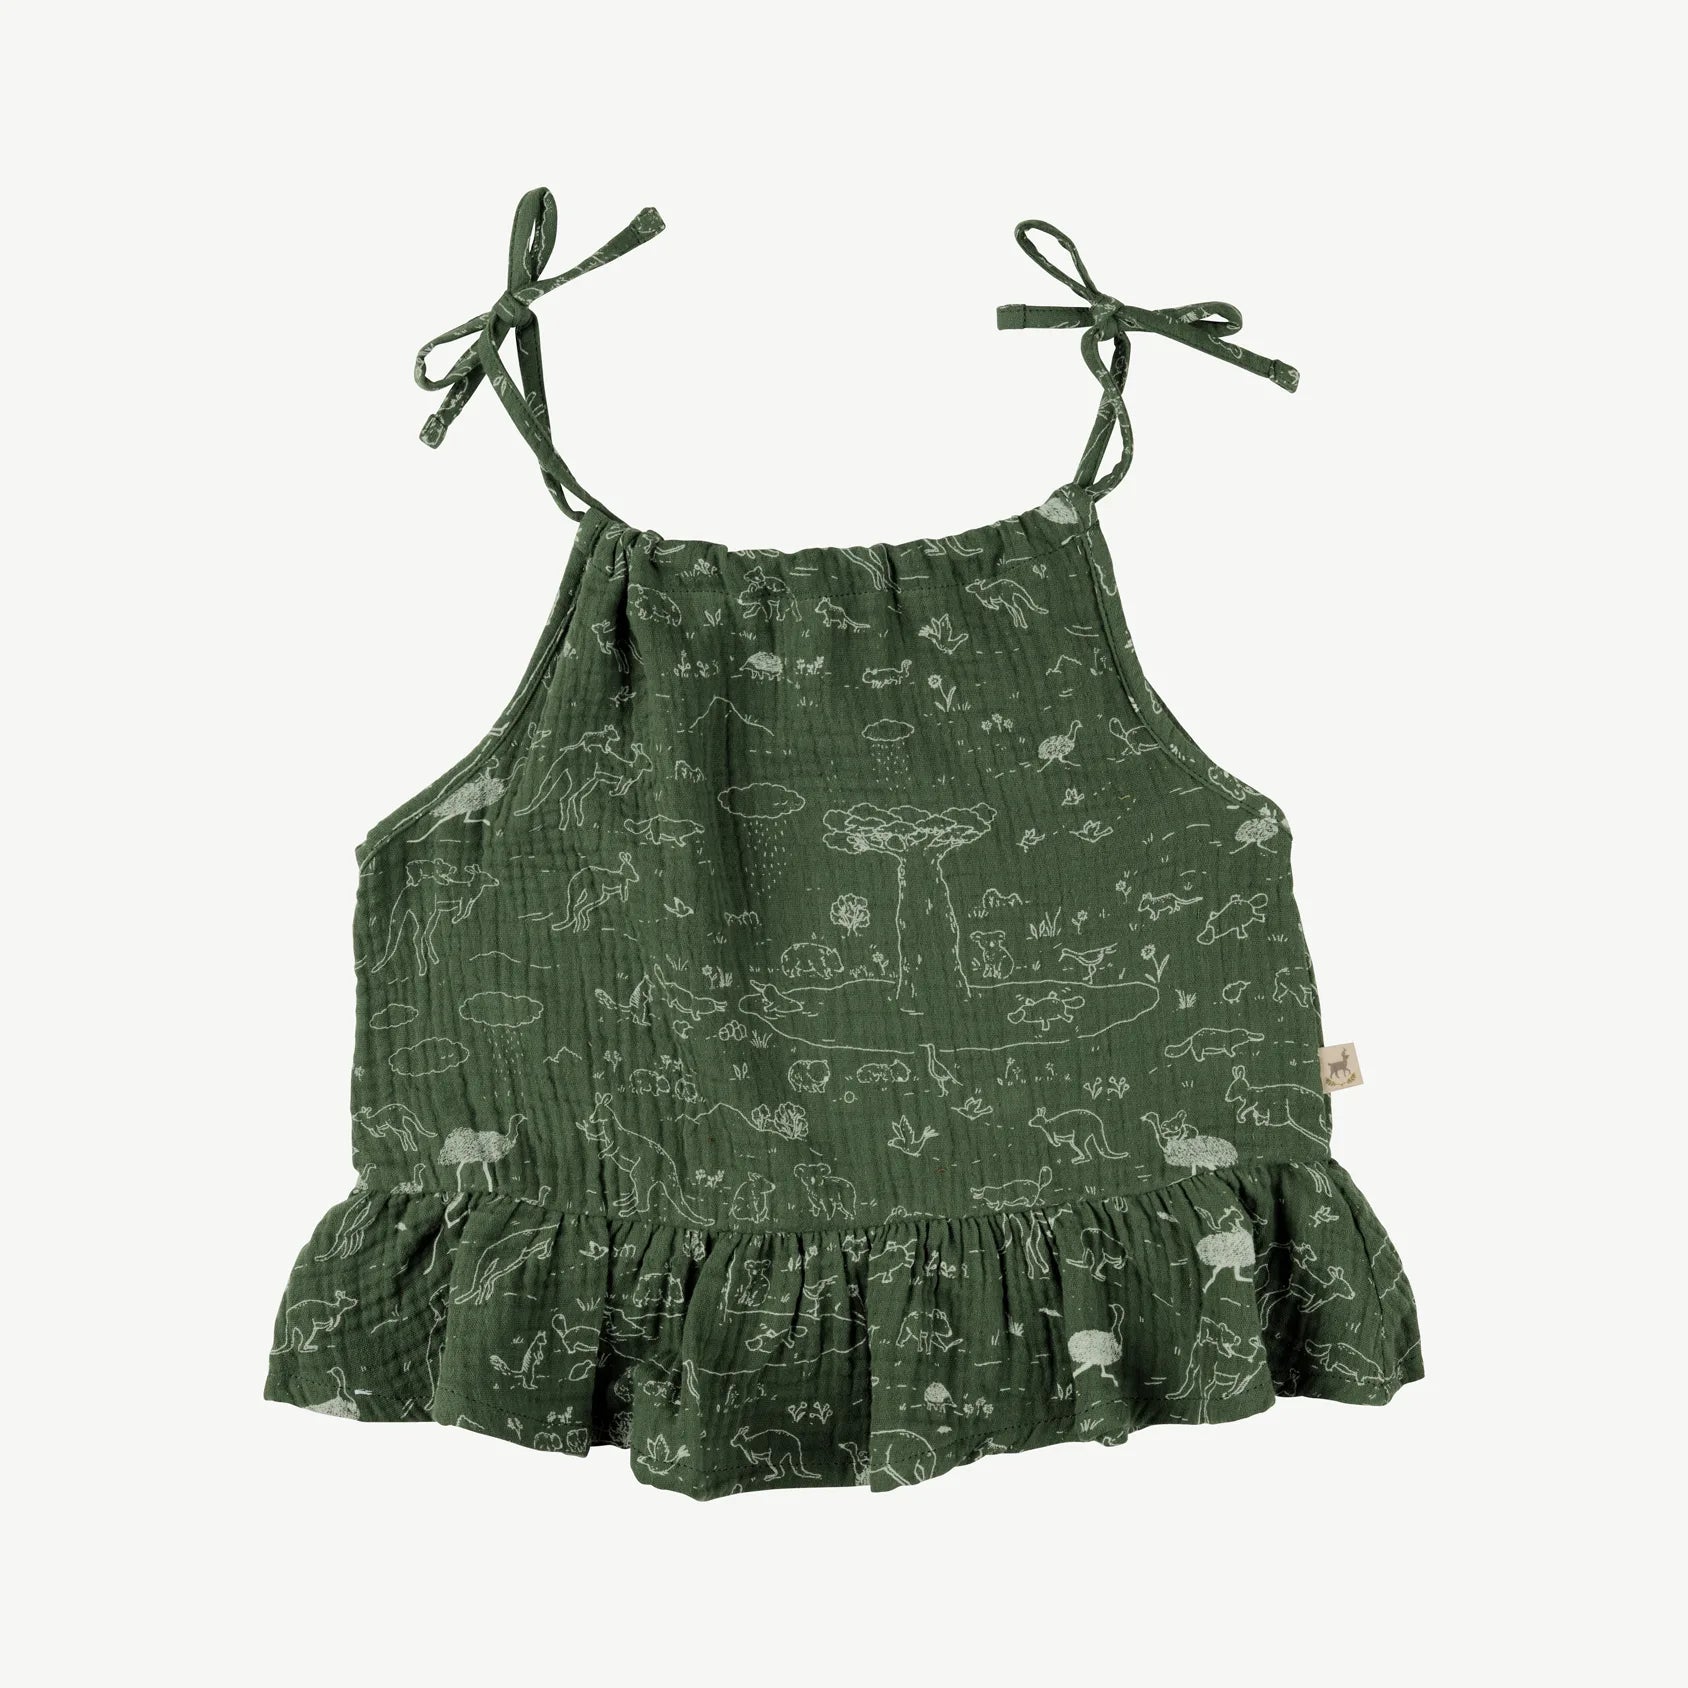 'the story' dark green strap blouse